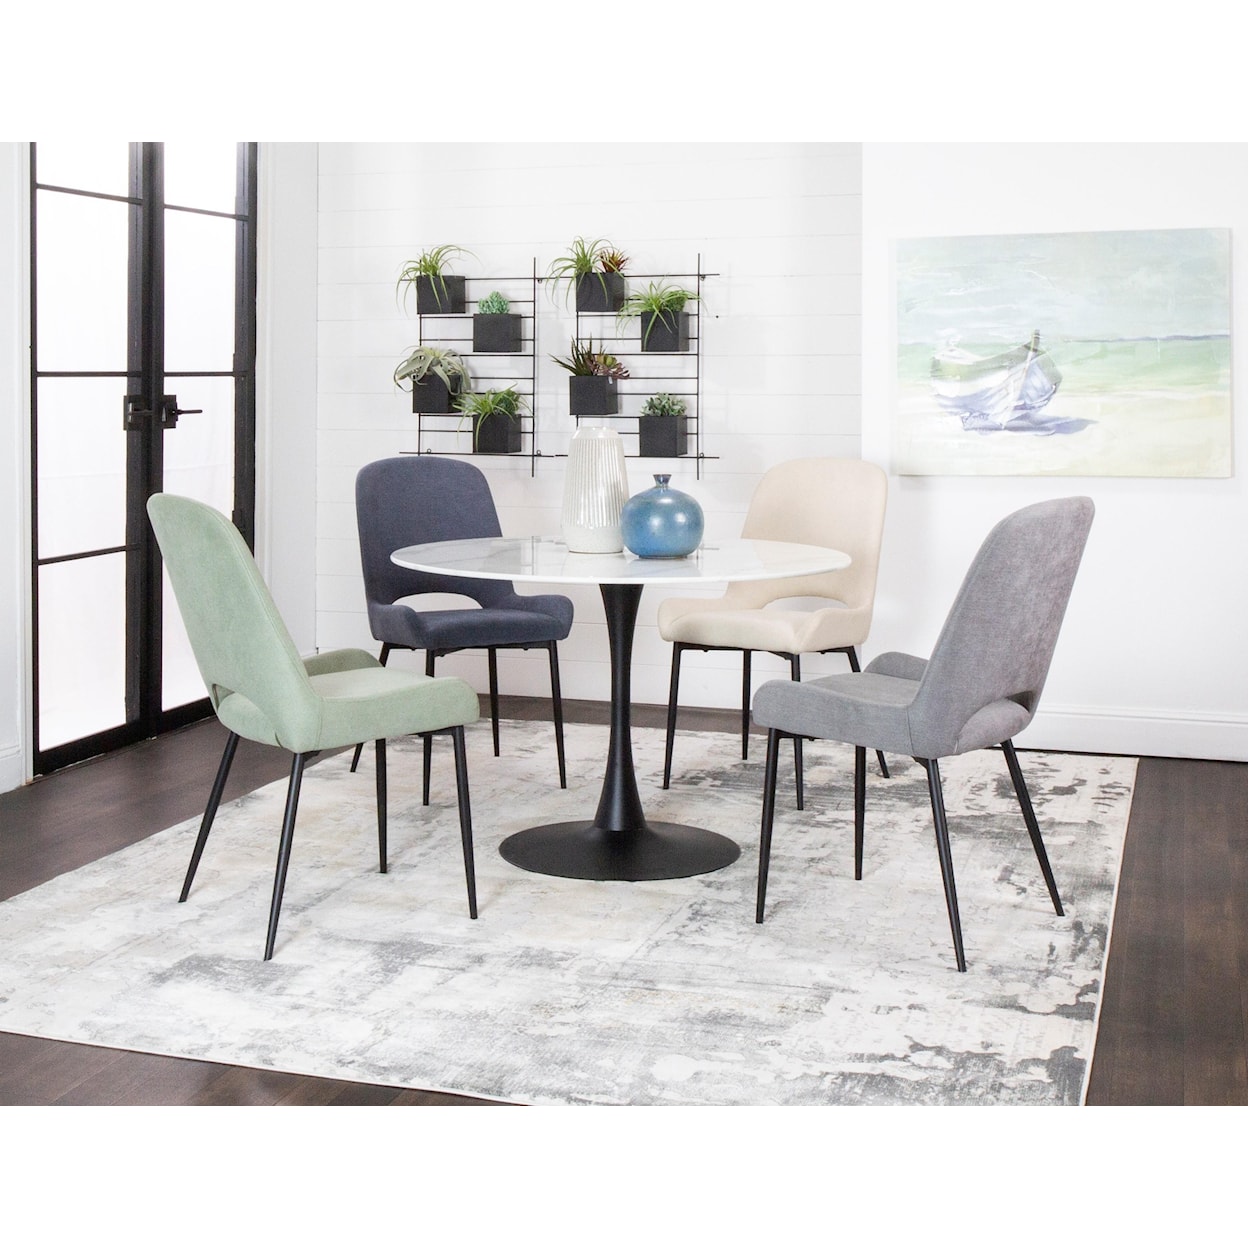 Cramco, Inc Trayce Trayce 5-Piece Dining Set in Charcoal